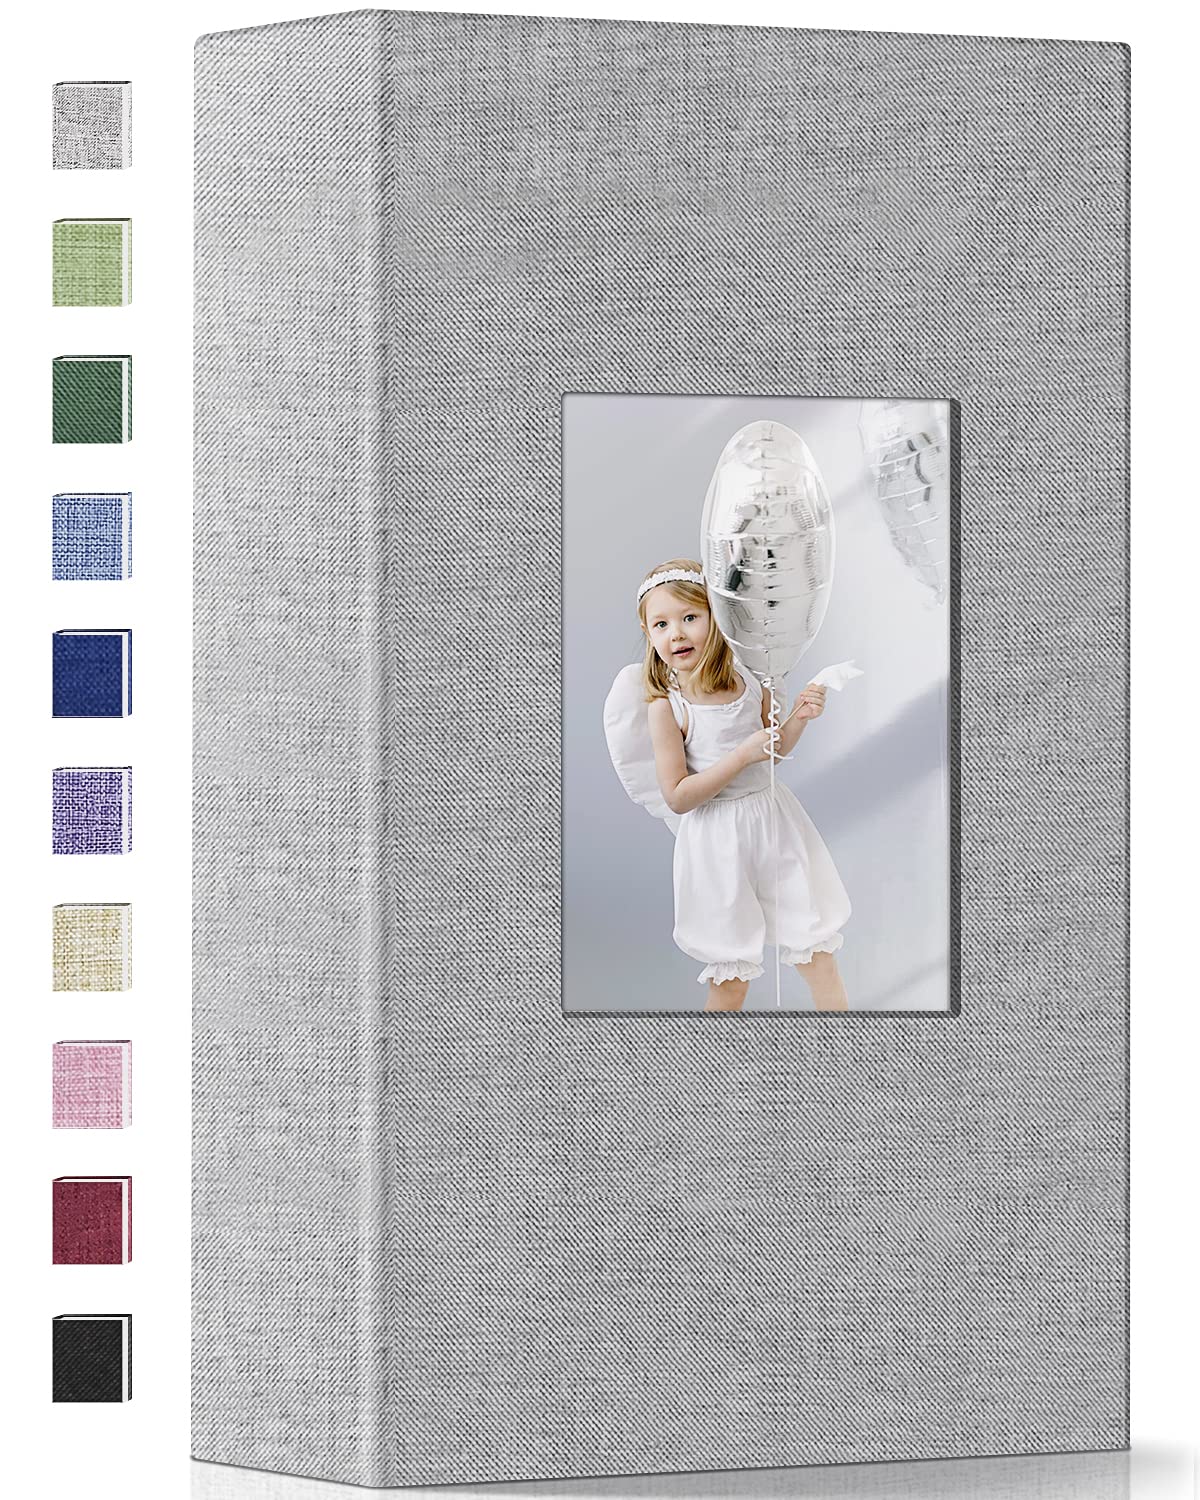 Small Photo Album 4x6 100 Photos Linen Cover Picture Photo Book For Family  Wedding Anniversary Baby Vacation Gray100 Pockets - Photo Albums -  AliExpress